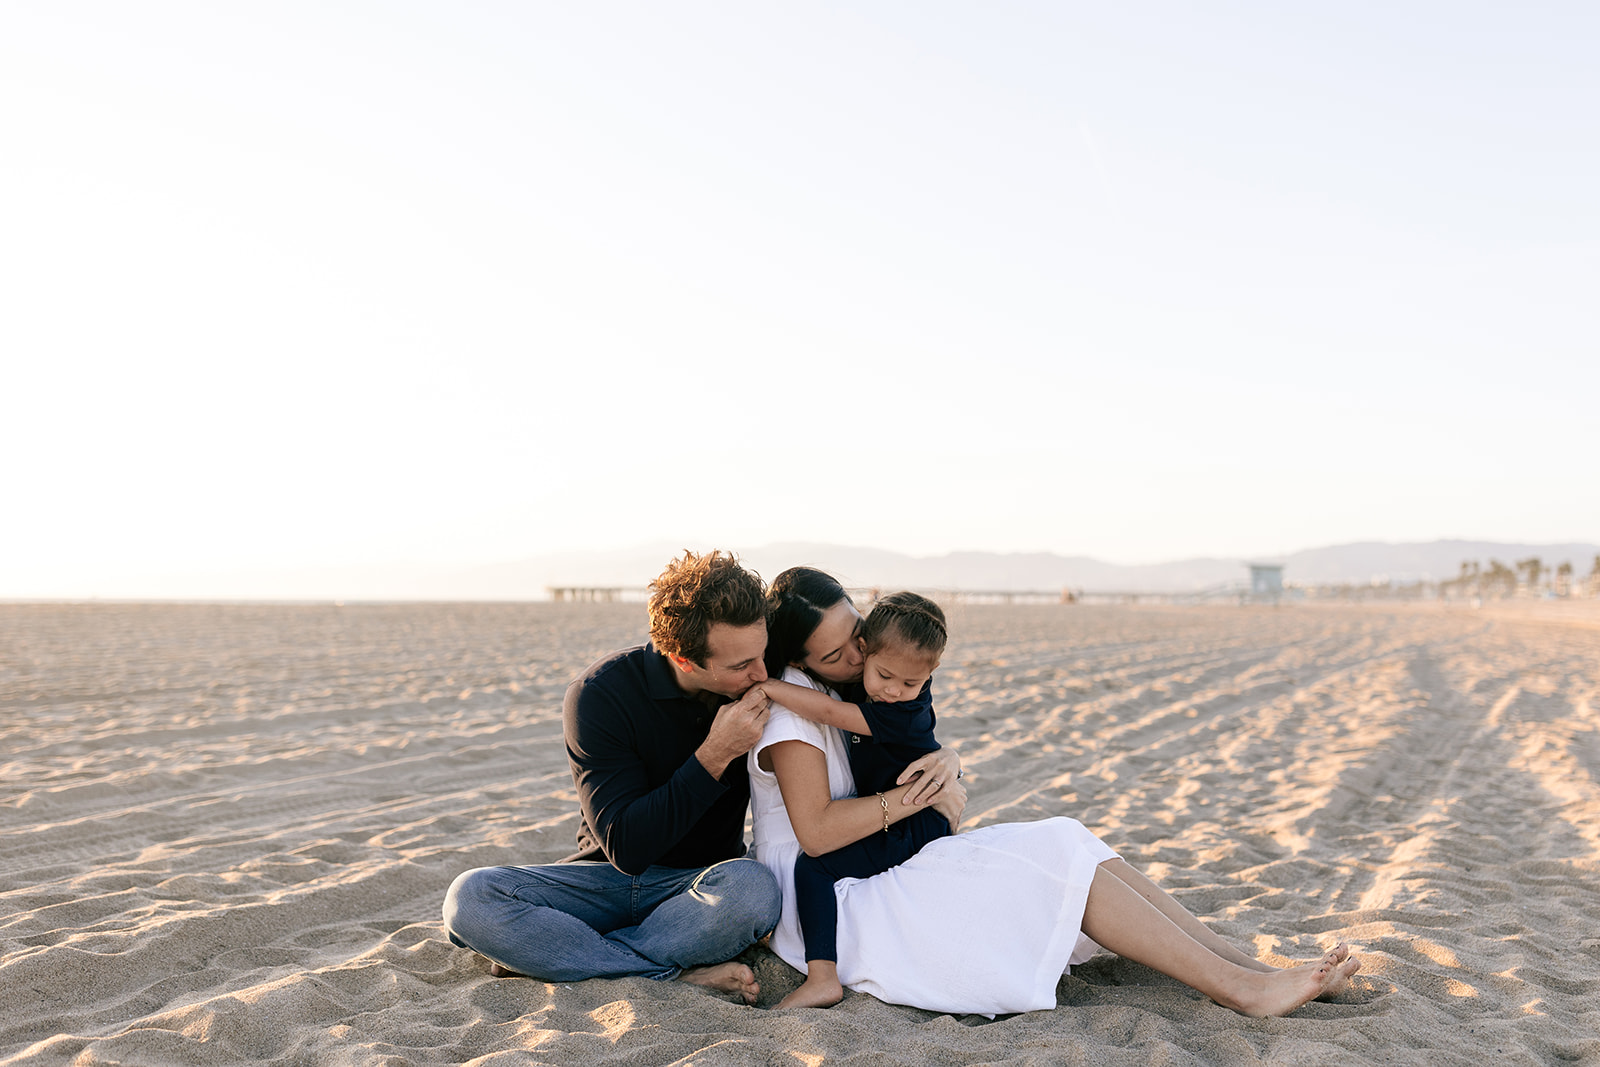 golden hour family maternity marina del rey california beach sunset couples poses couples on the beach photoshoot